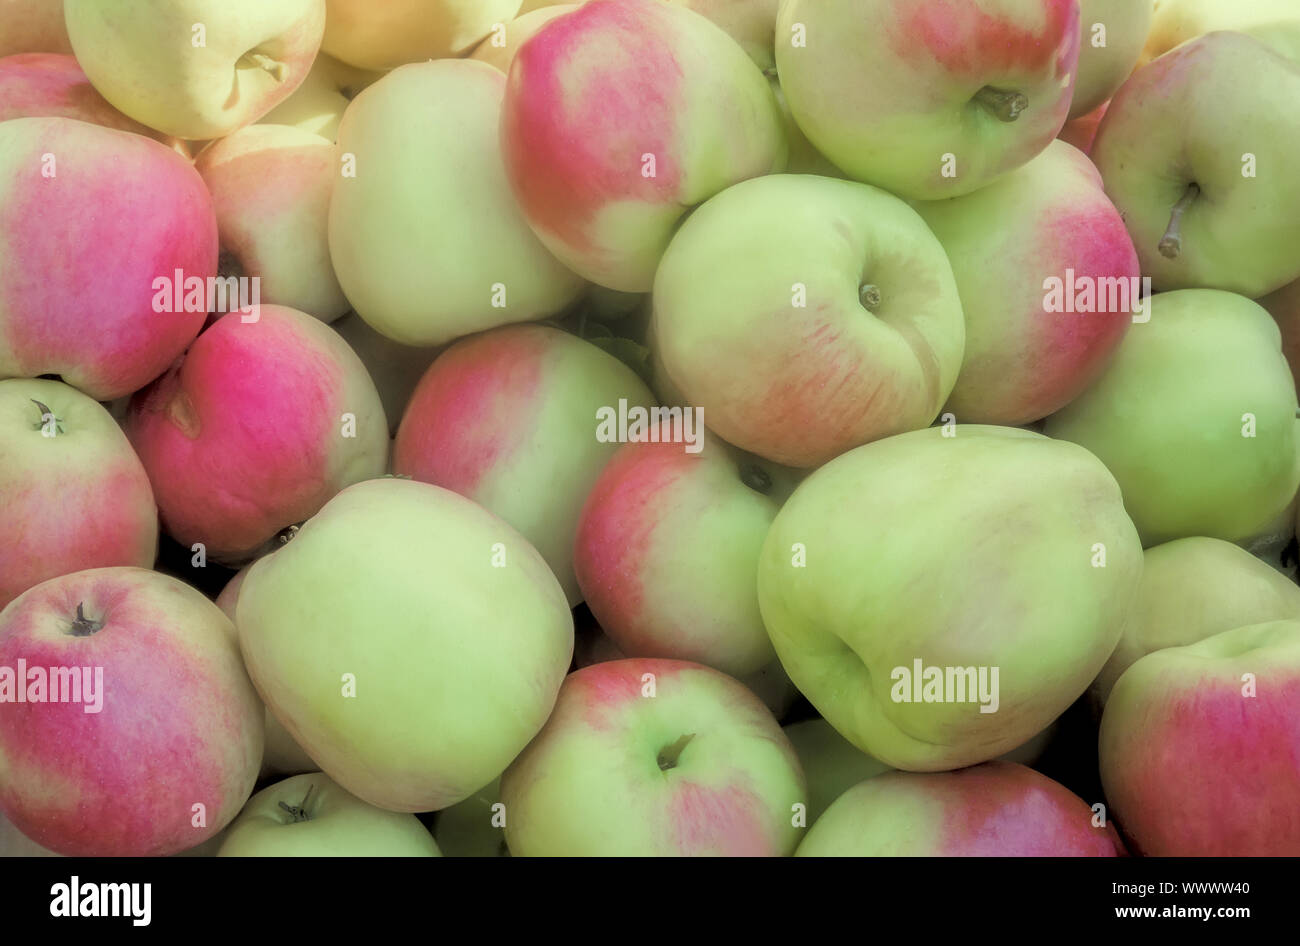 Large ripe apples , photographed close up. Stock Photo